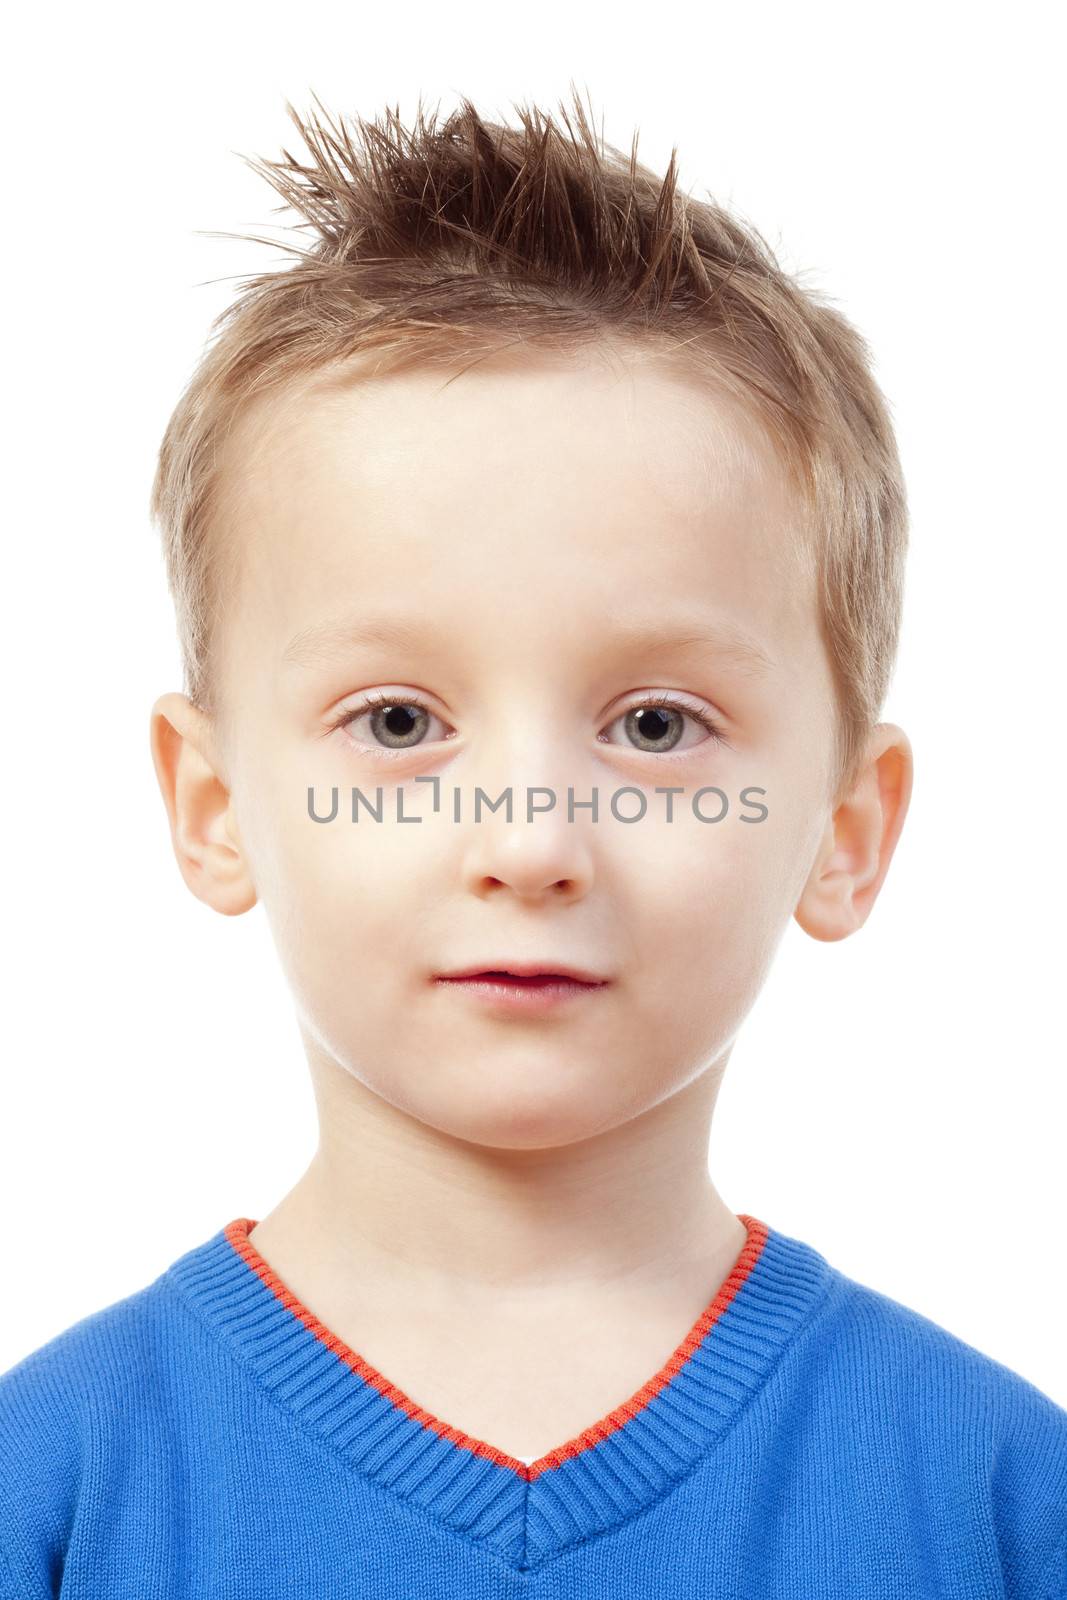 portrait of a boy with brown hair in blue top - isolated on white